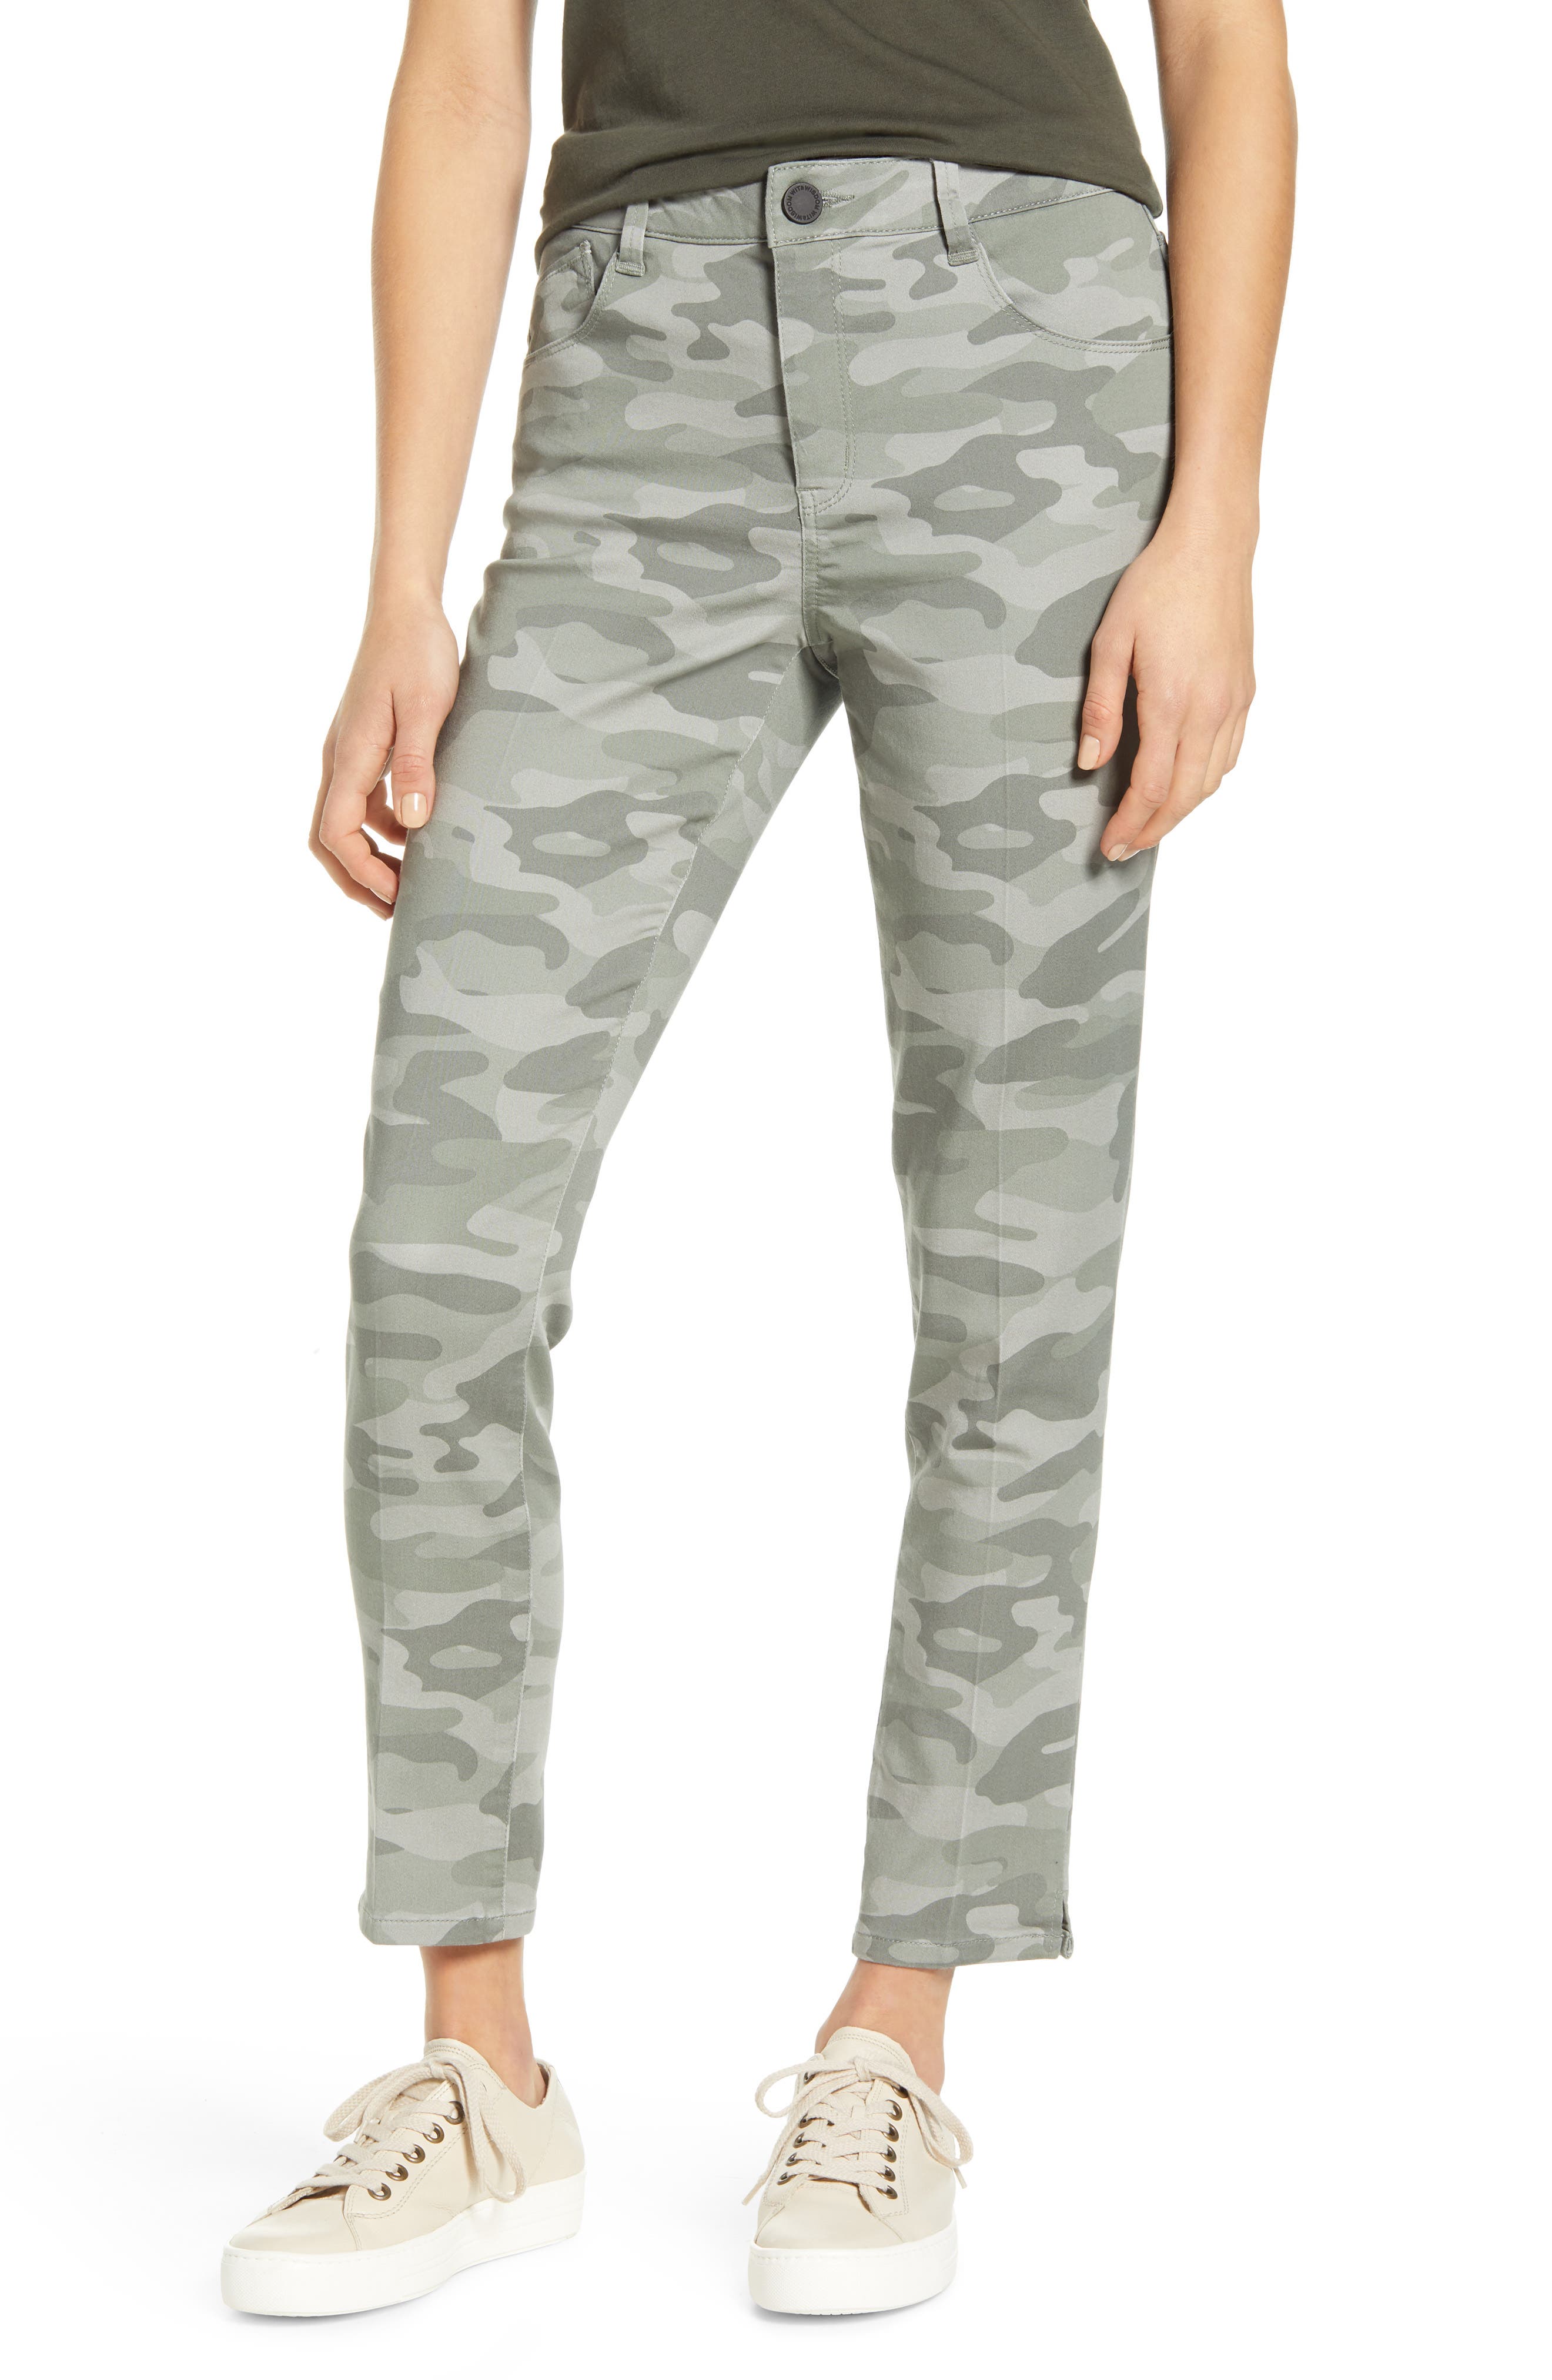 NWT Wit Wisdom Democracy Nordstrom Deep Sage Camo 8P Ab-solution Ankle Skimmer